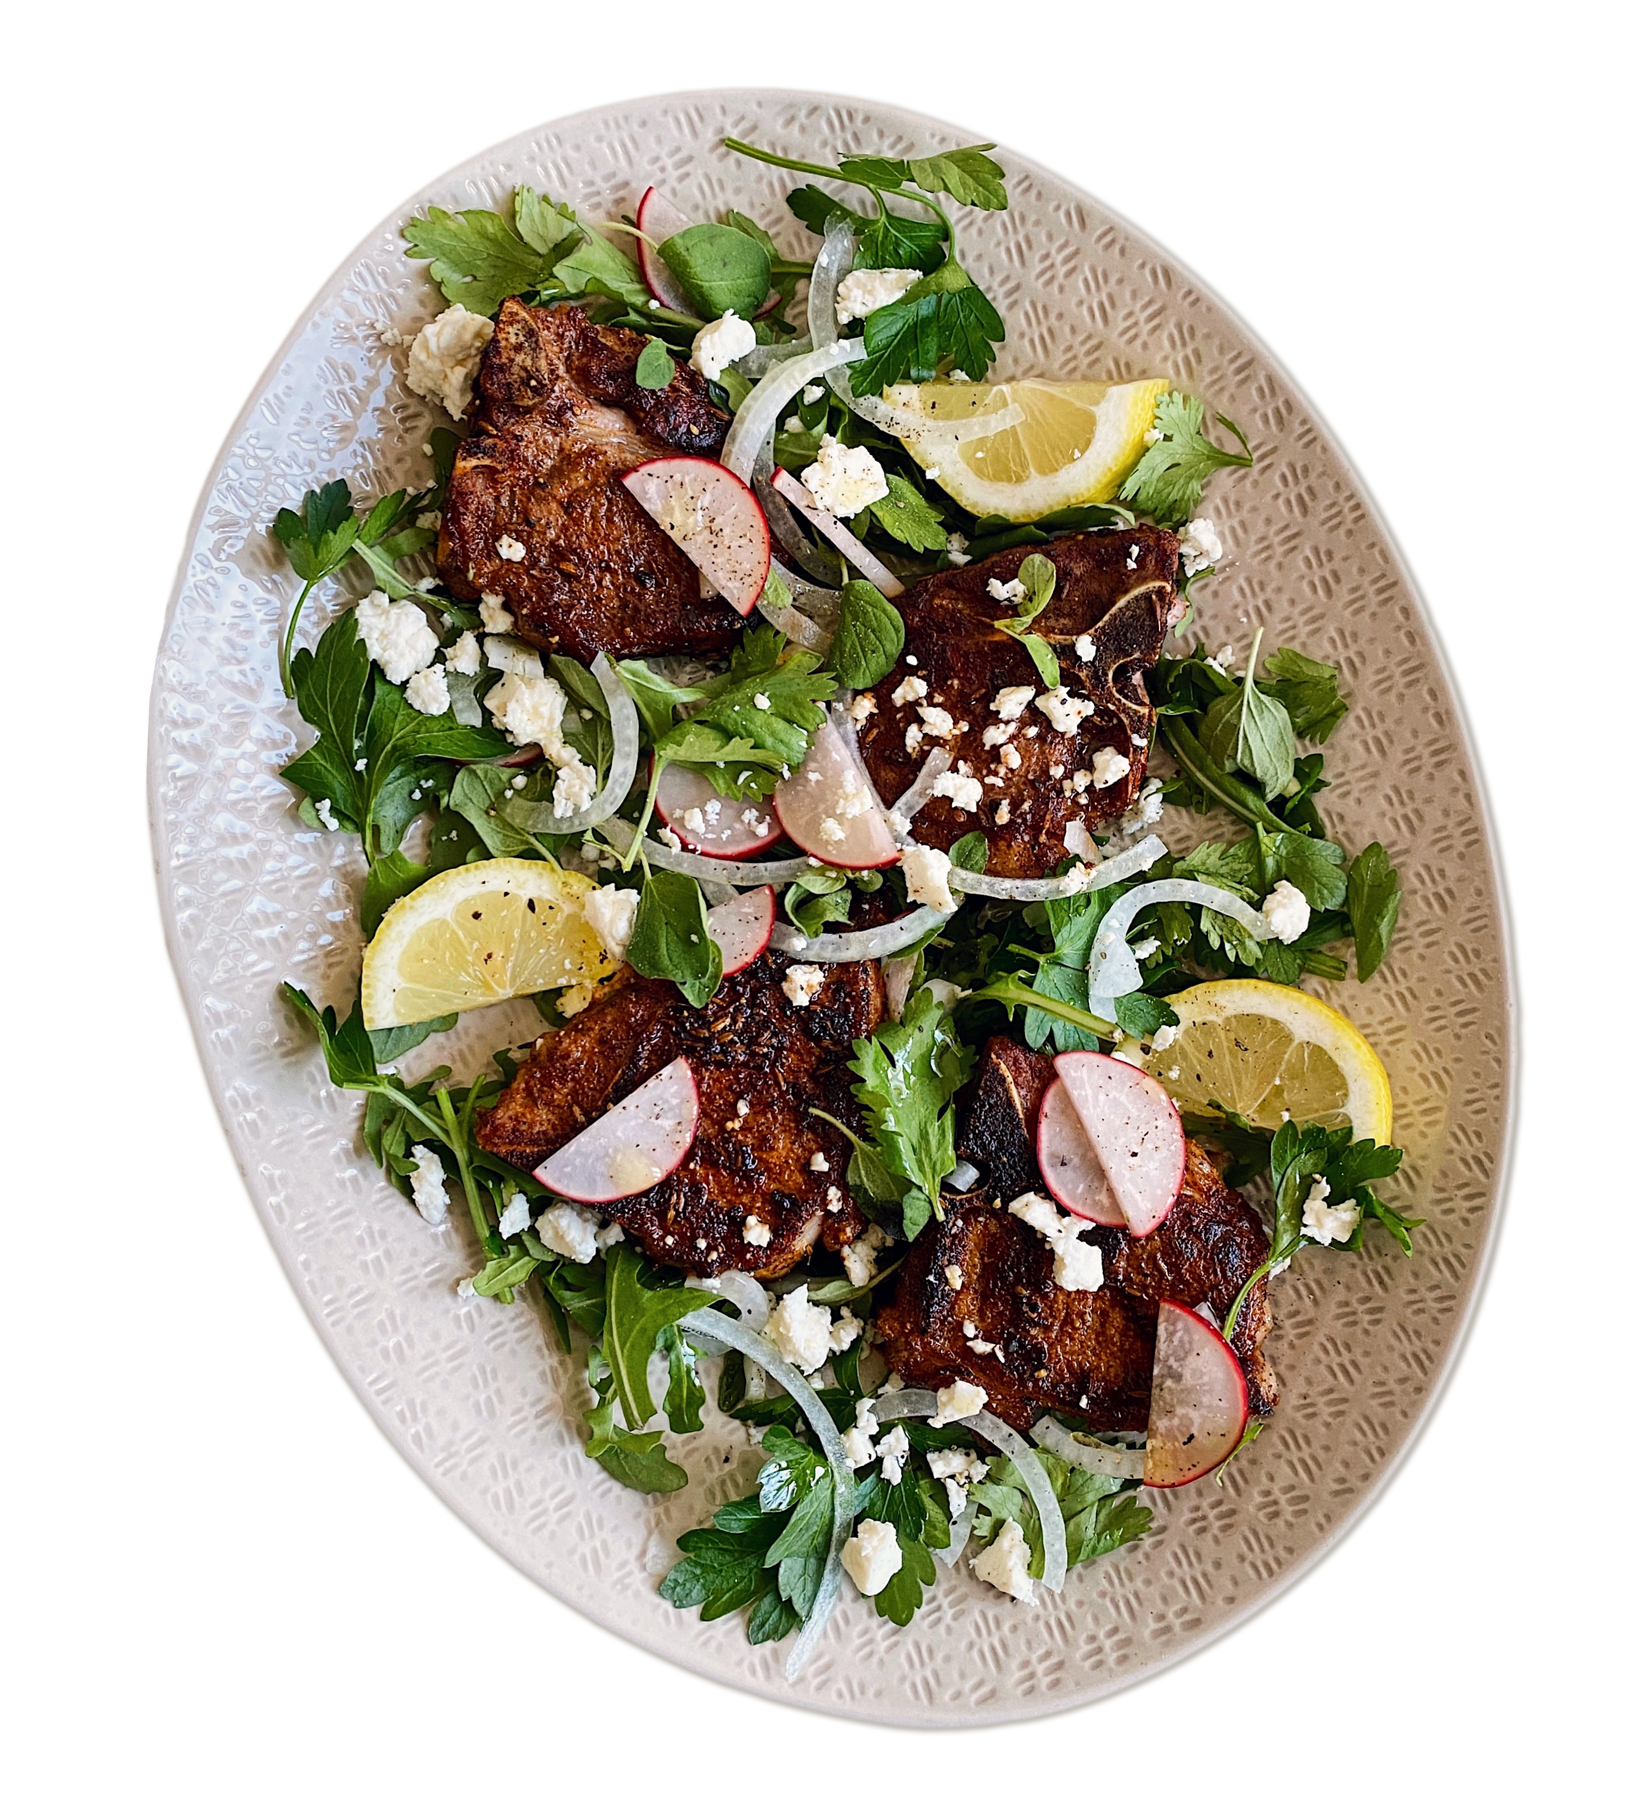 SPICES LAMB CHOPS with Herb Salad and Pickled Radish